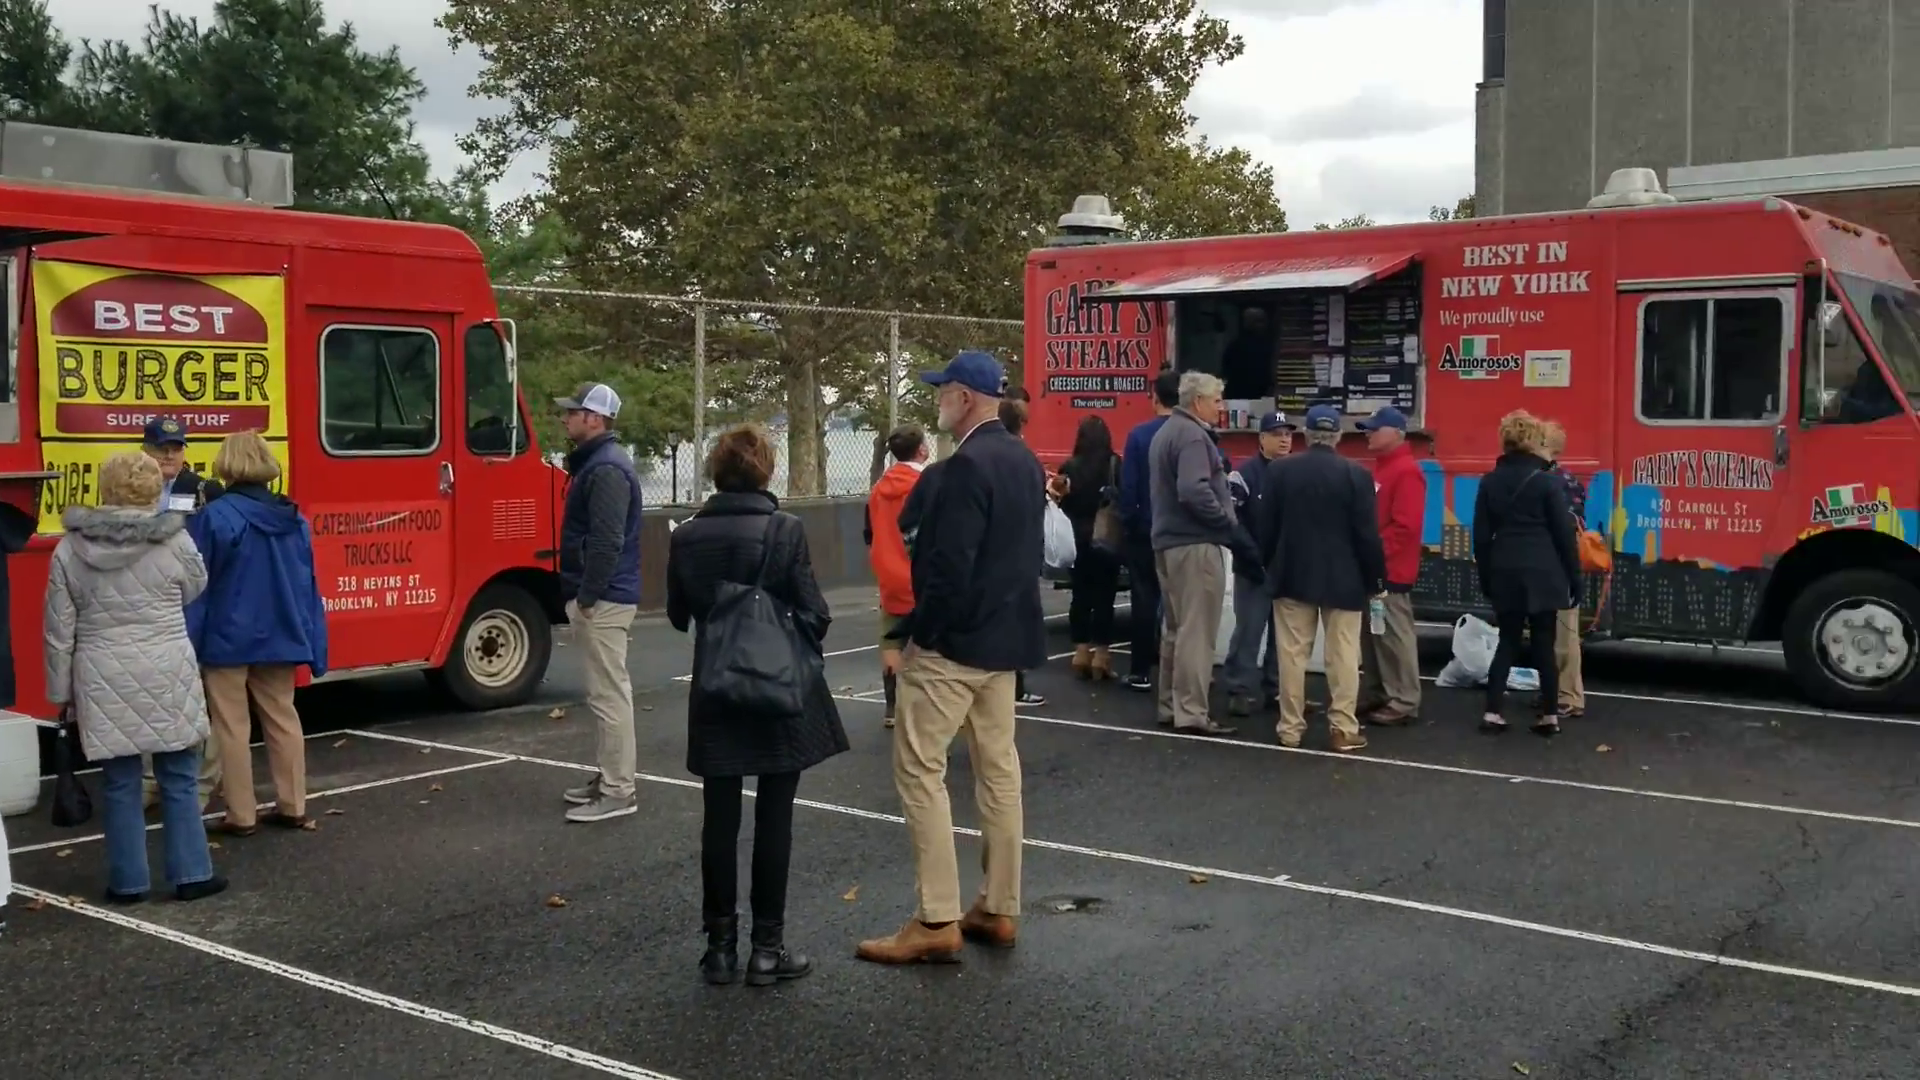 Garyssteaks & best burger Food Truck Catering for the Bronx college homecoming